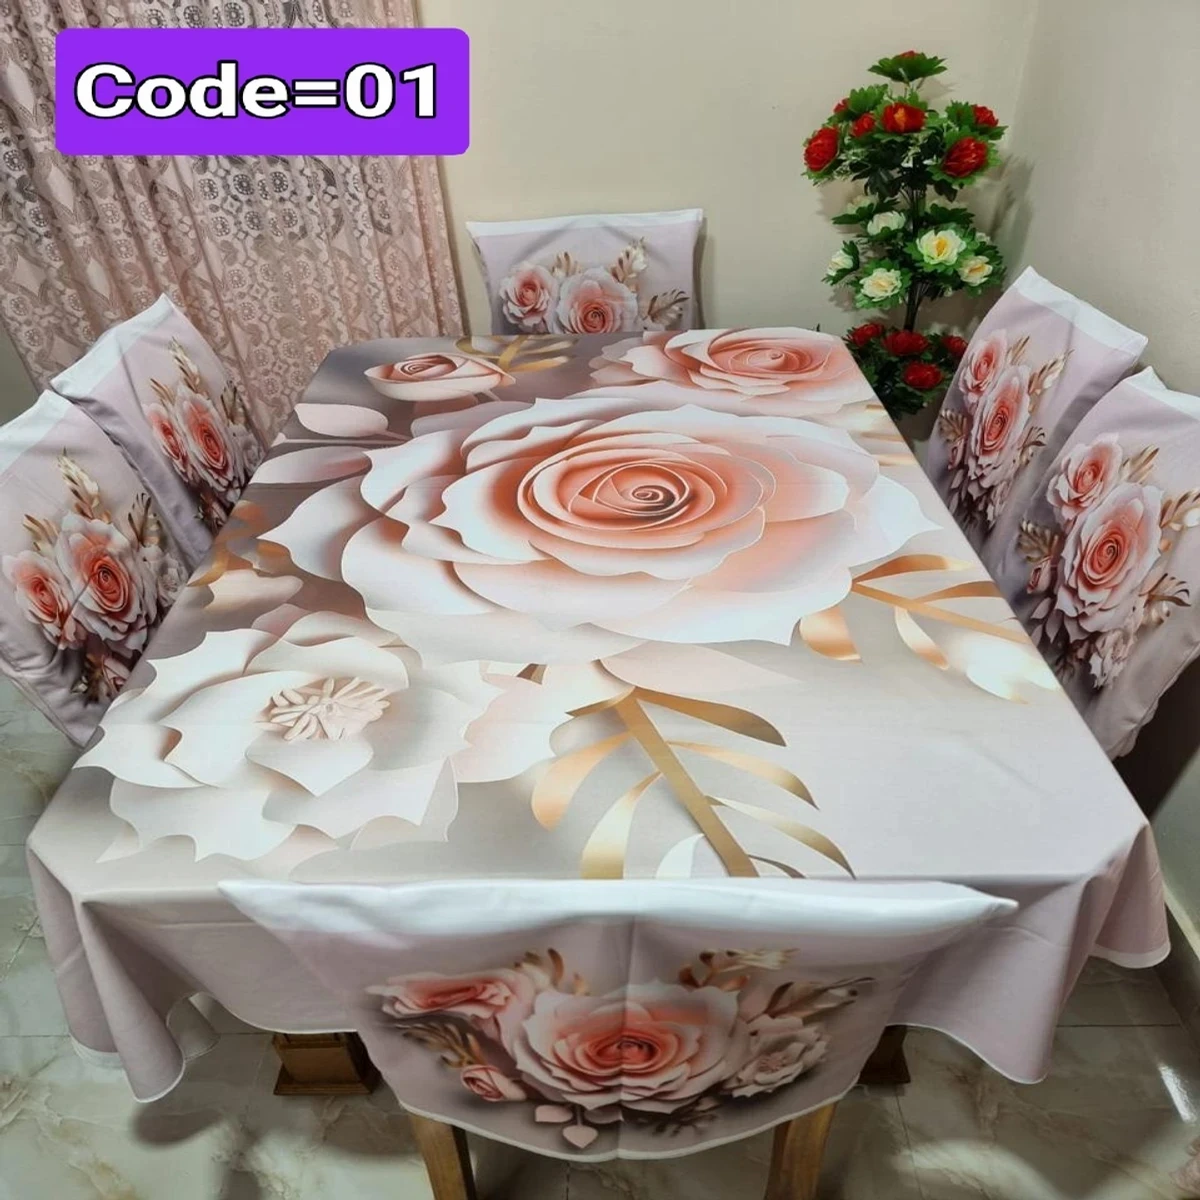 3D Pint Dining Table and Chair Cover Code= 01